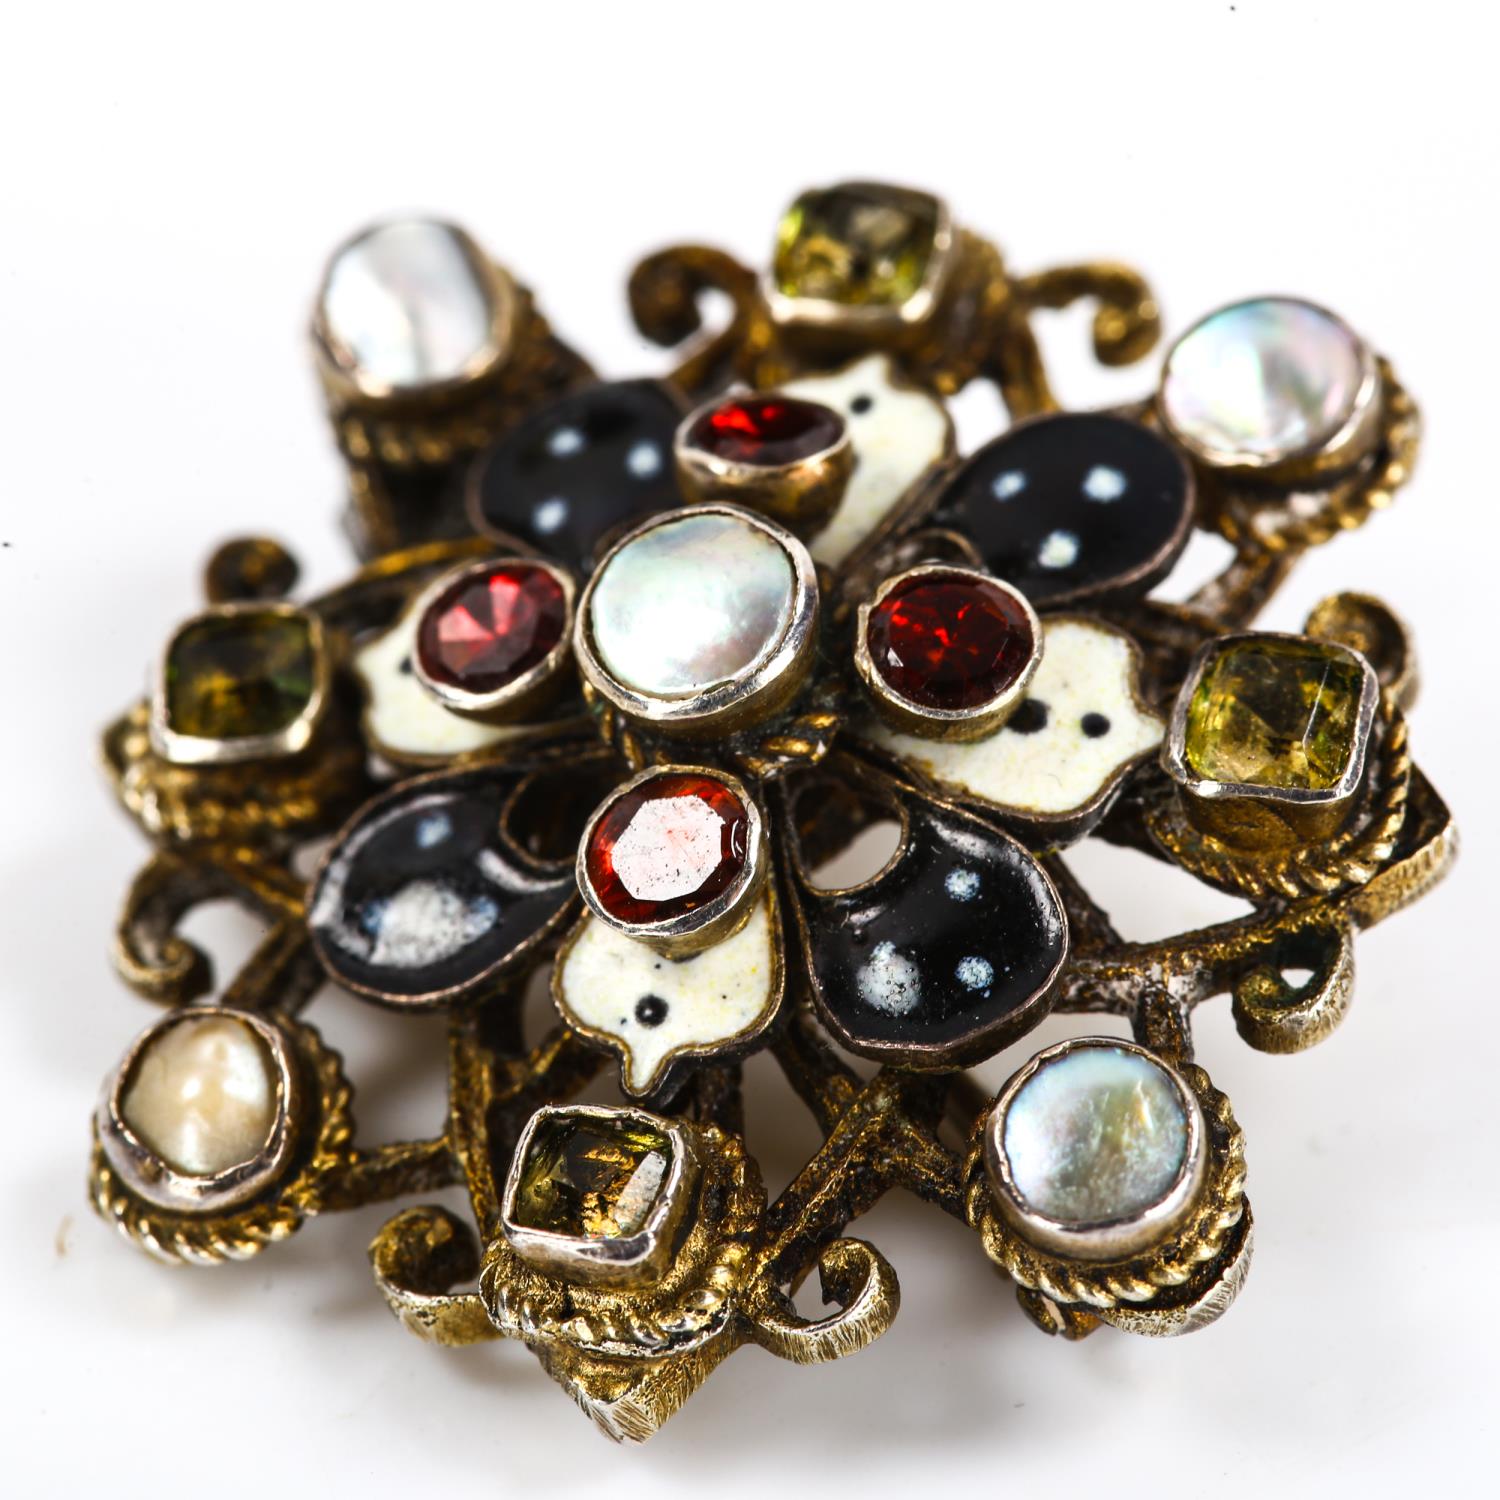 An Austro-Hungarian enamel and stone set brooch, with blister pearl accents, brooch length 30.9mm, - Image 2 of 5